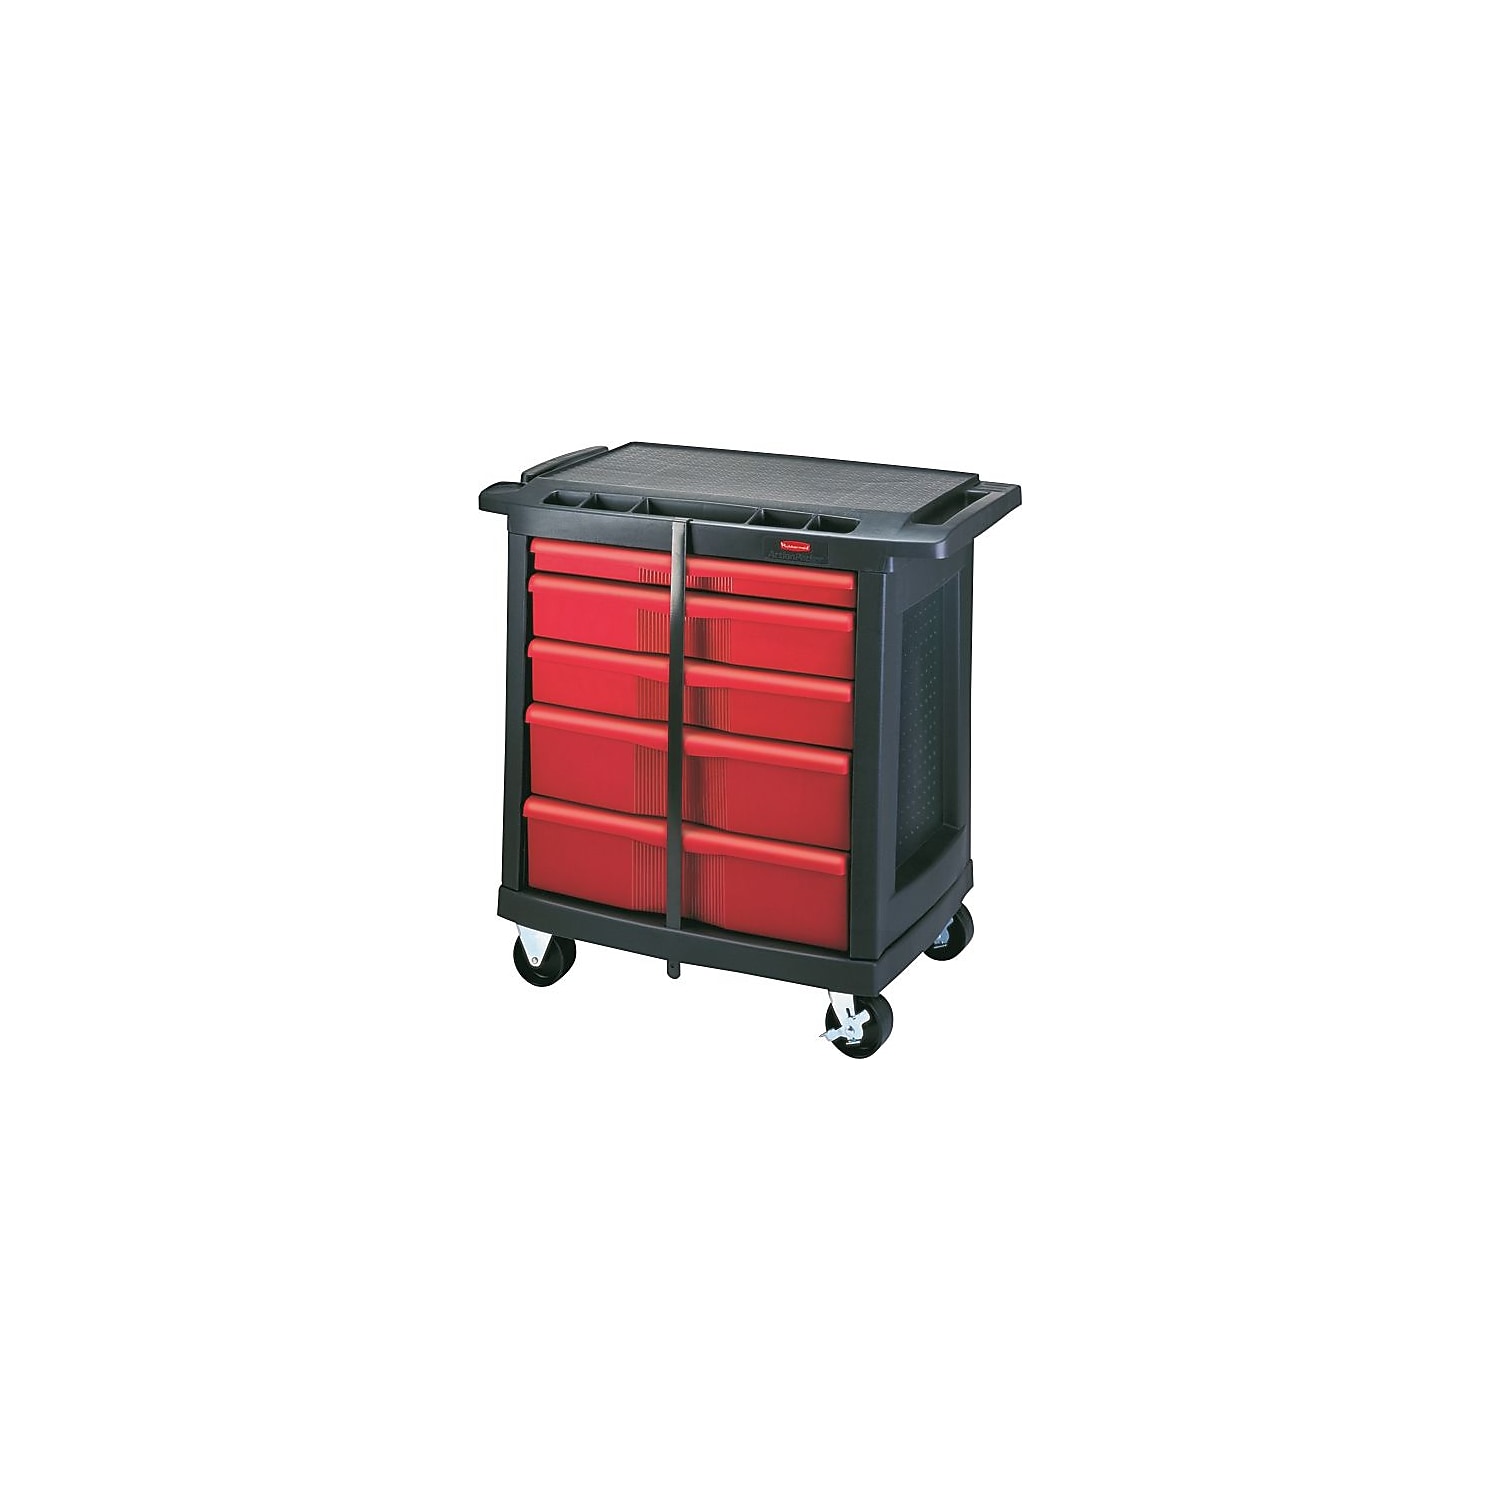 Rubbermaid 5-Drawer Mobile Workcenter FG773488BLA - image 2 of 2